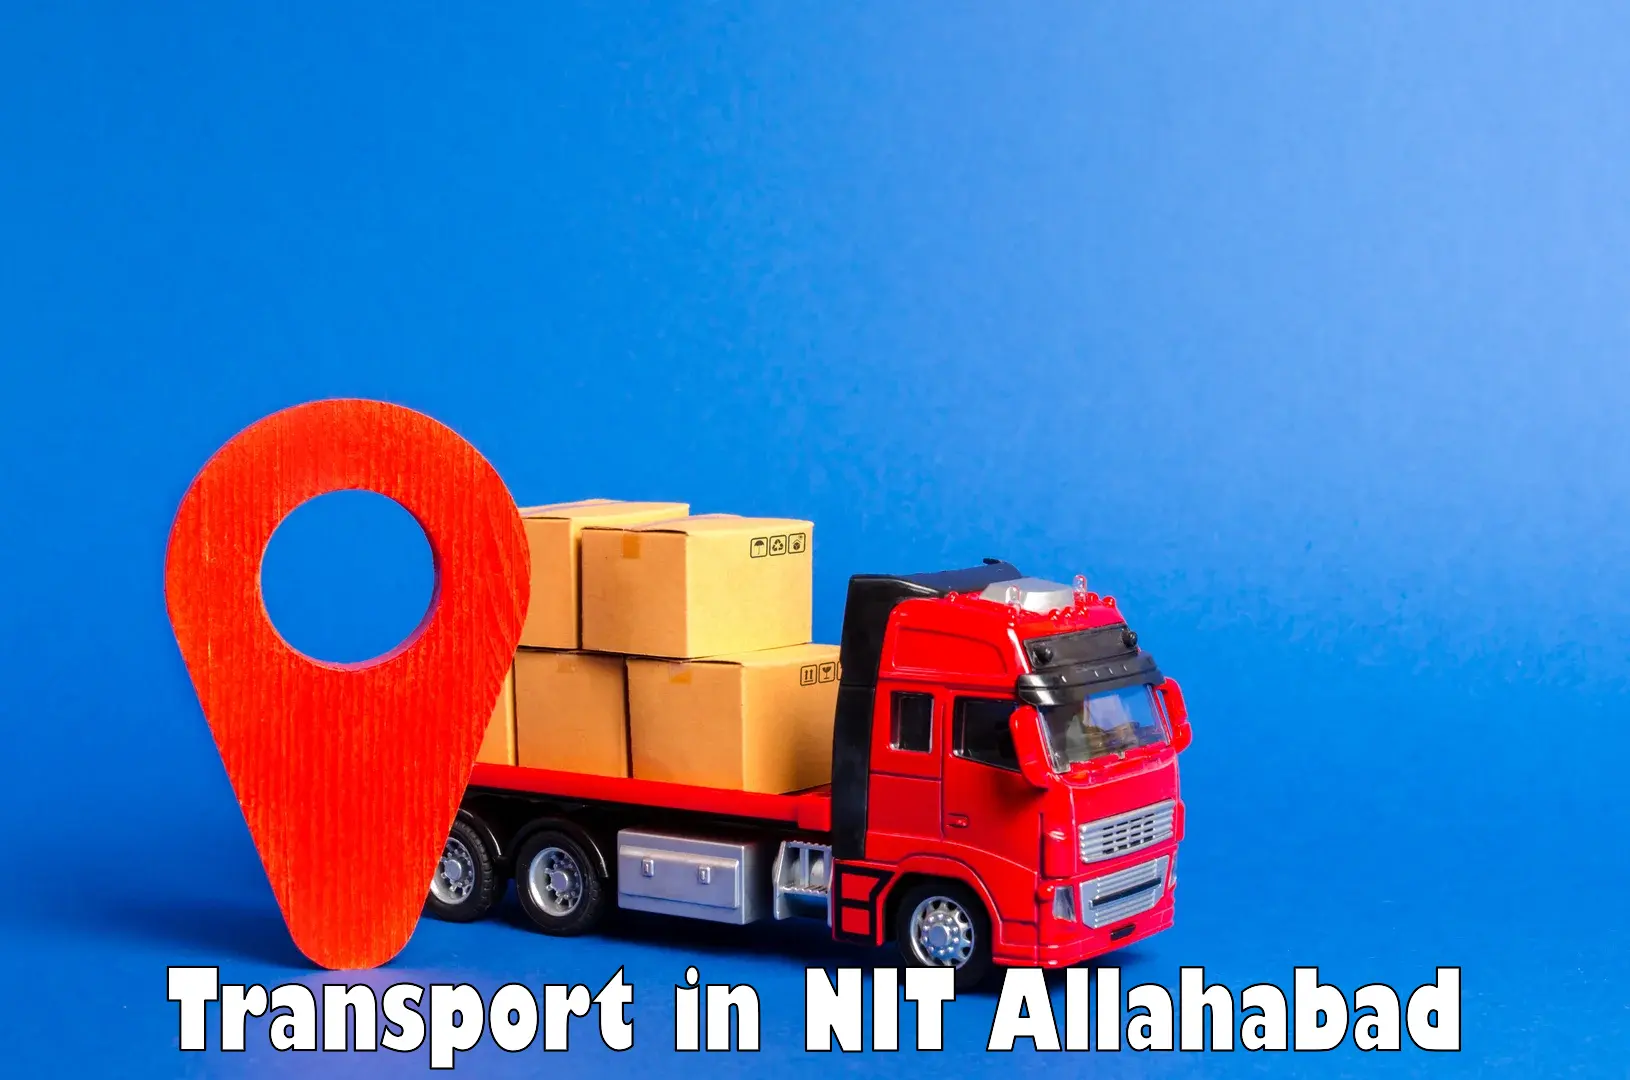 Transport shared services in NIT Allahabad